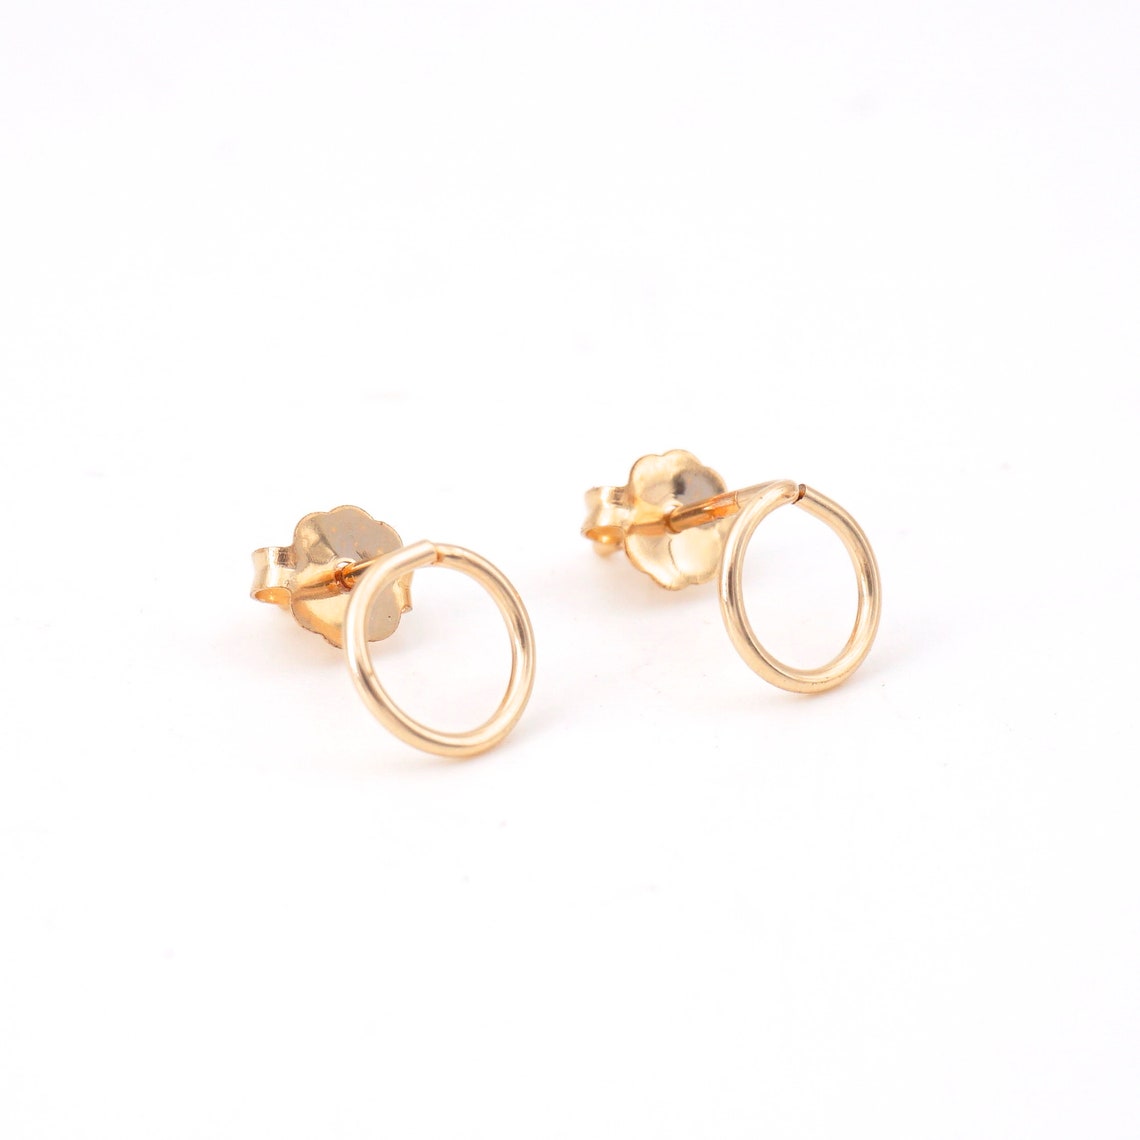 7mm Open Circle Stud Earrings: Sterling Silver & Gold-Filled 010 - Patination Design